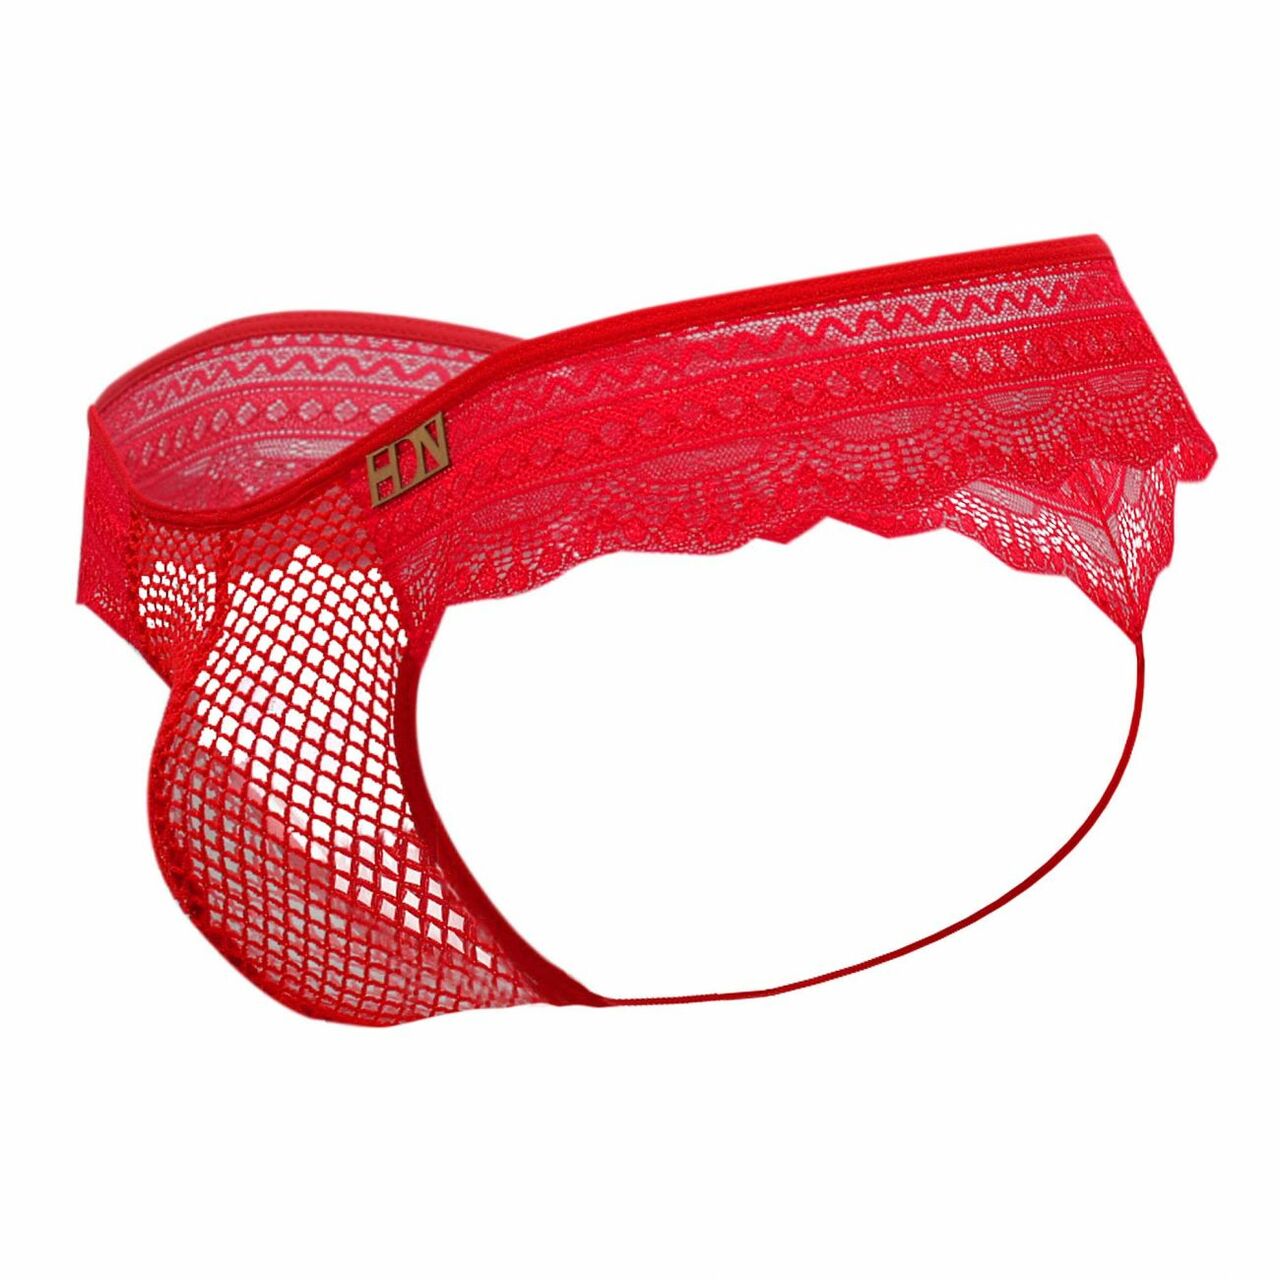 Mens Hidden Seduction Fishnet and Lace String Back Thong Red